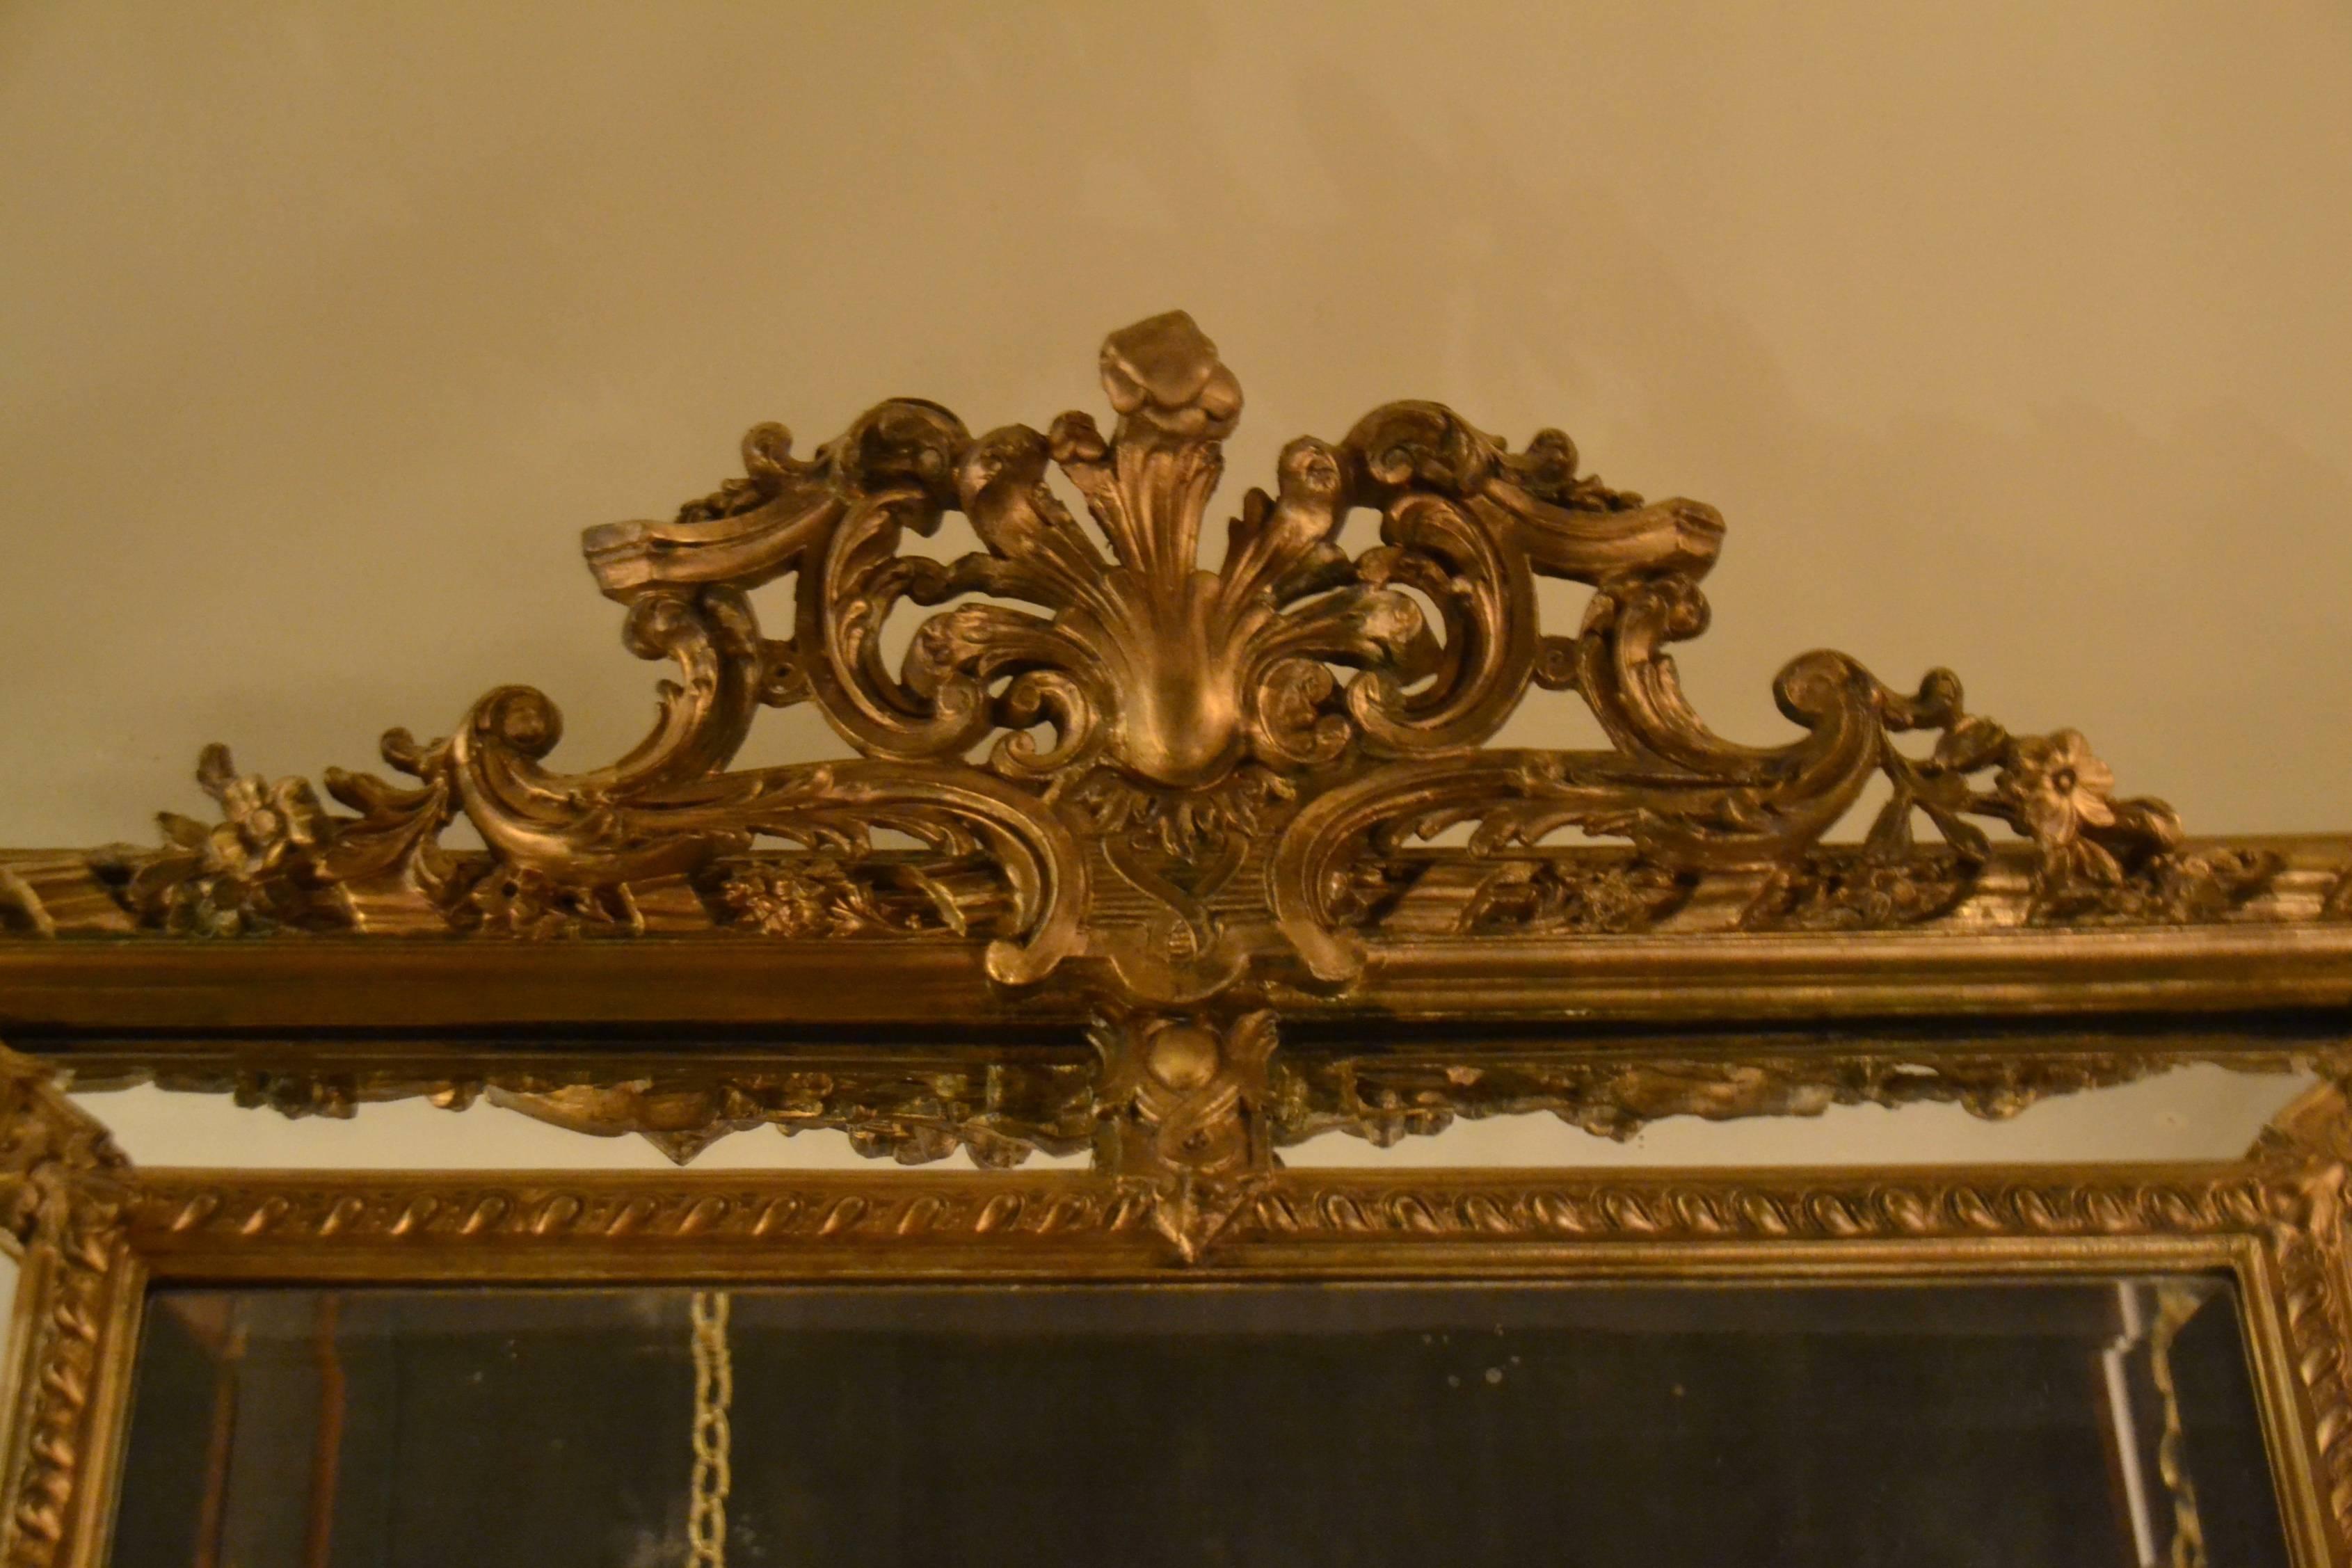 A handsome carved wood paneled mirror. If you like these mirrors, this one will not disappoint.